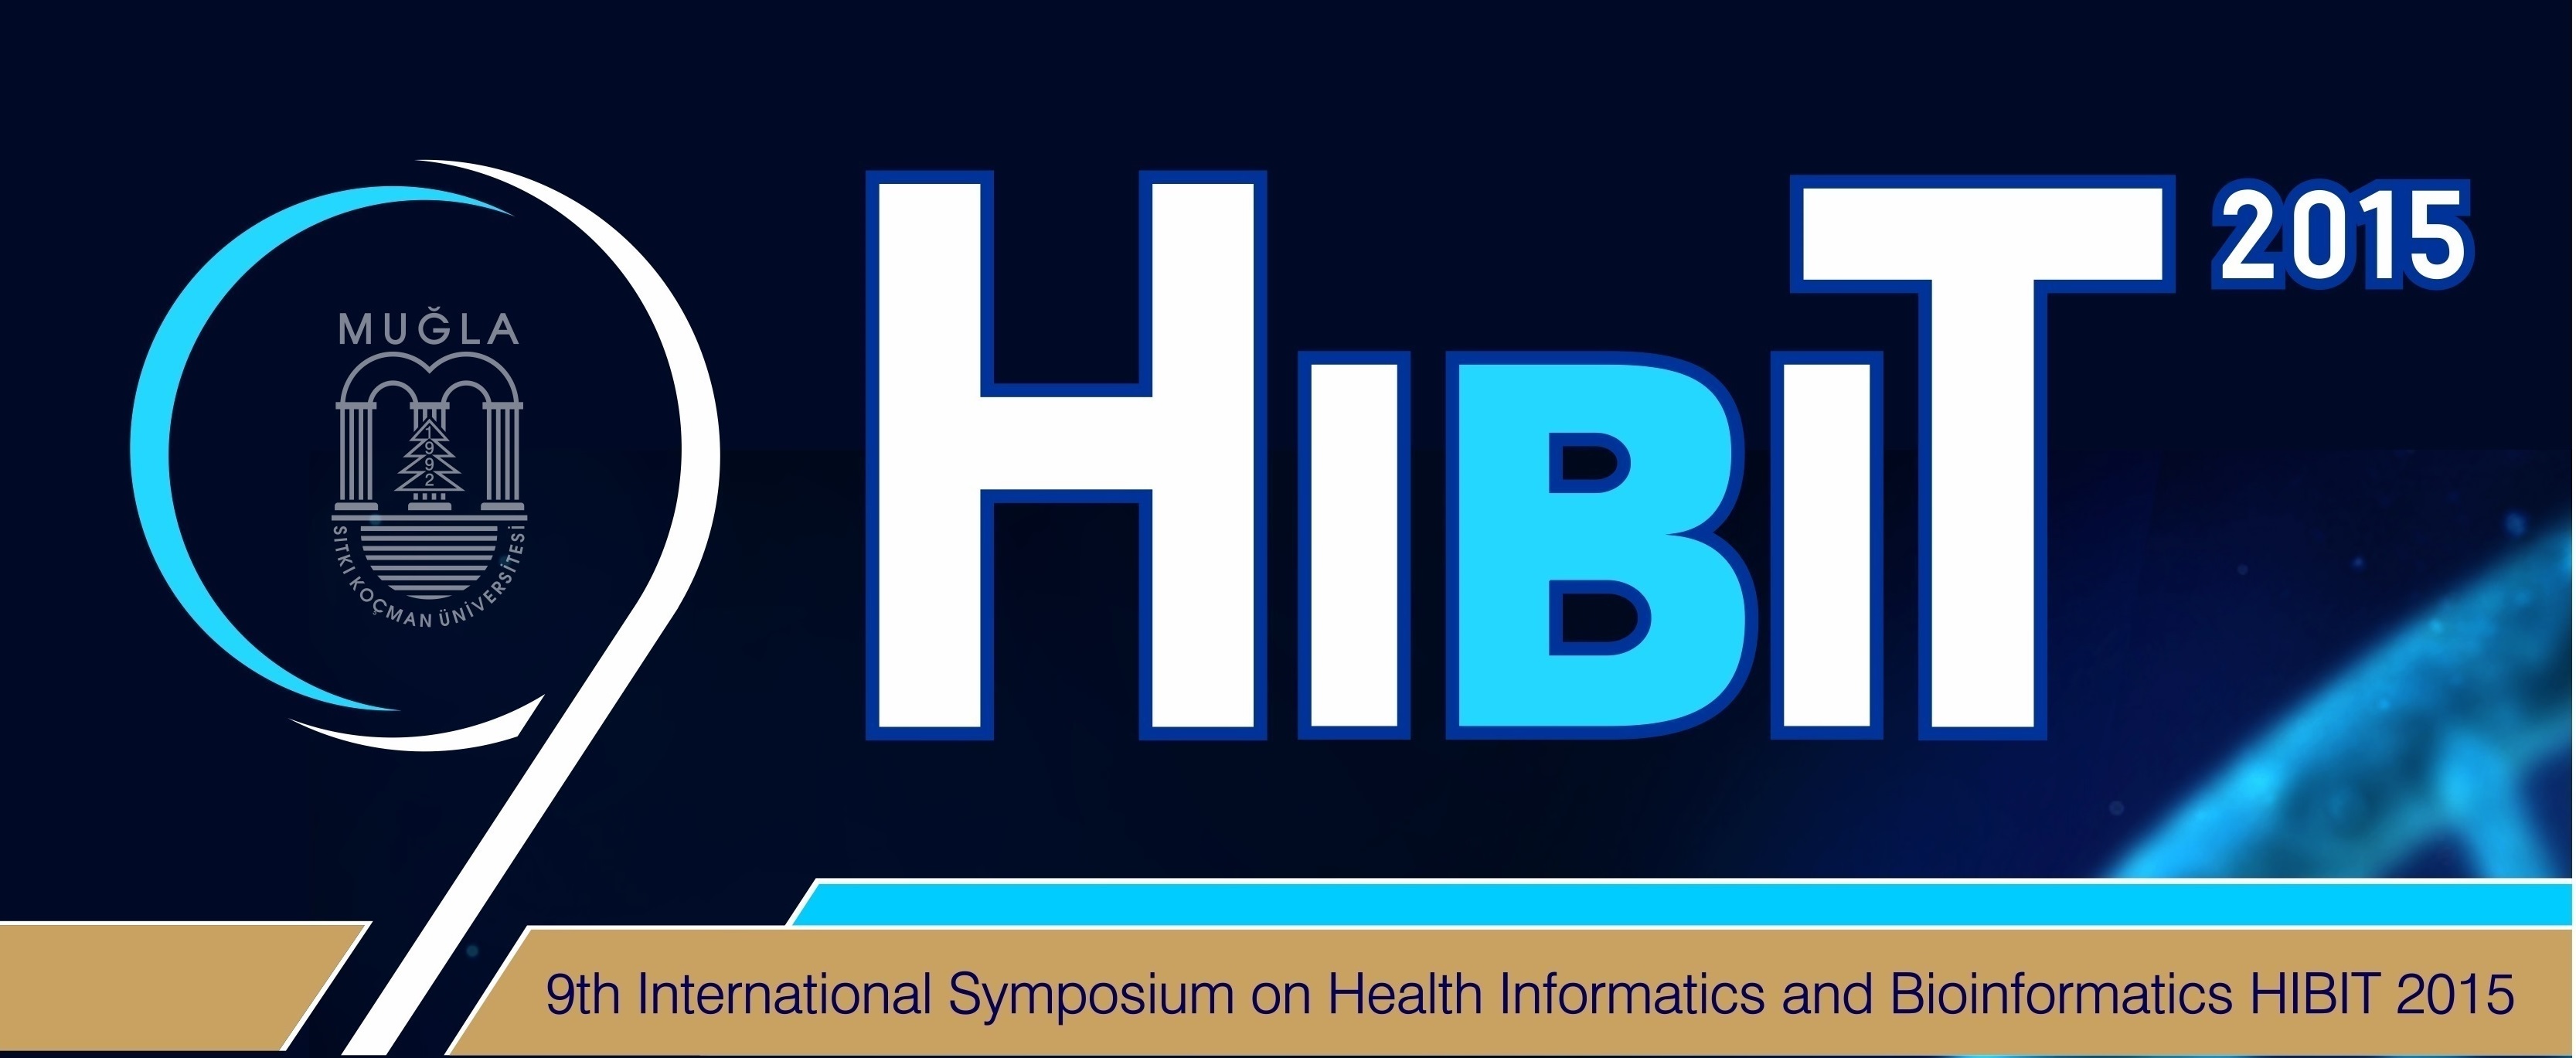 The International Symposium on Health Informatics and Bioinformatics, (HIBIT), now in its ninth year (HIBIT 2015), aims to bring together academics, researchers and practitioners who work in these popular and fulfilling areas and to create the much-needed synergy among medical, biological and information technology sectors. HIBIT is one of the few conferences emphasizing such synergy. HIBIT provides a forum for discussion, exploration and development of both theoretical and practical aspects of health informatics and bioinformatics and a chance to follow current research in this area by networking with other bioinformaticians. 